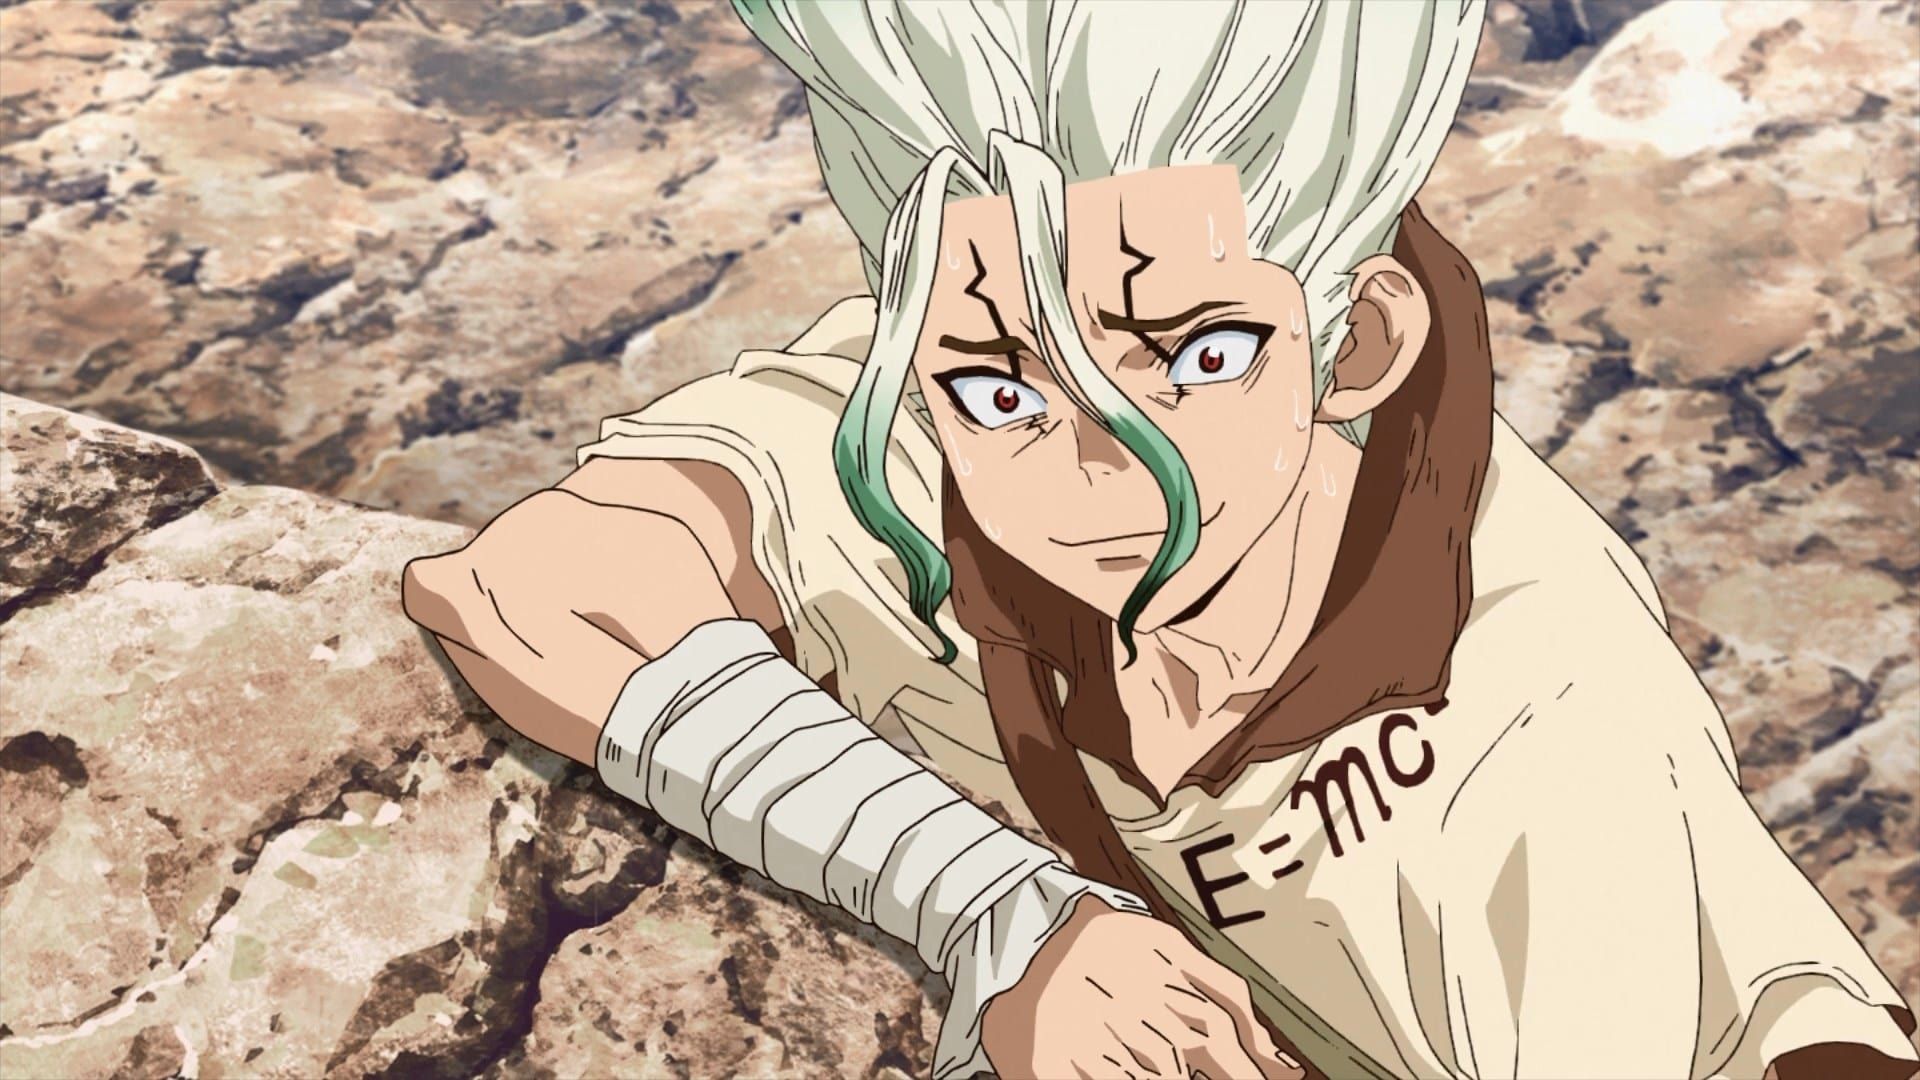 Dr. Stone background